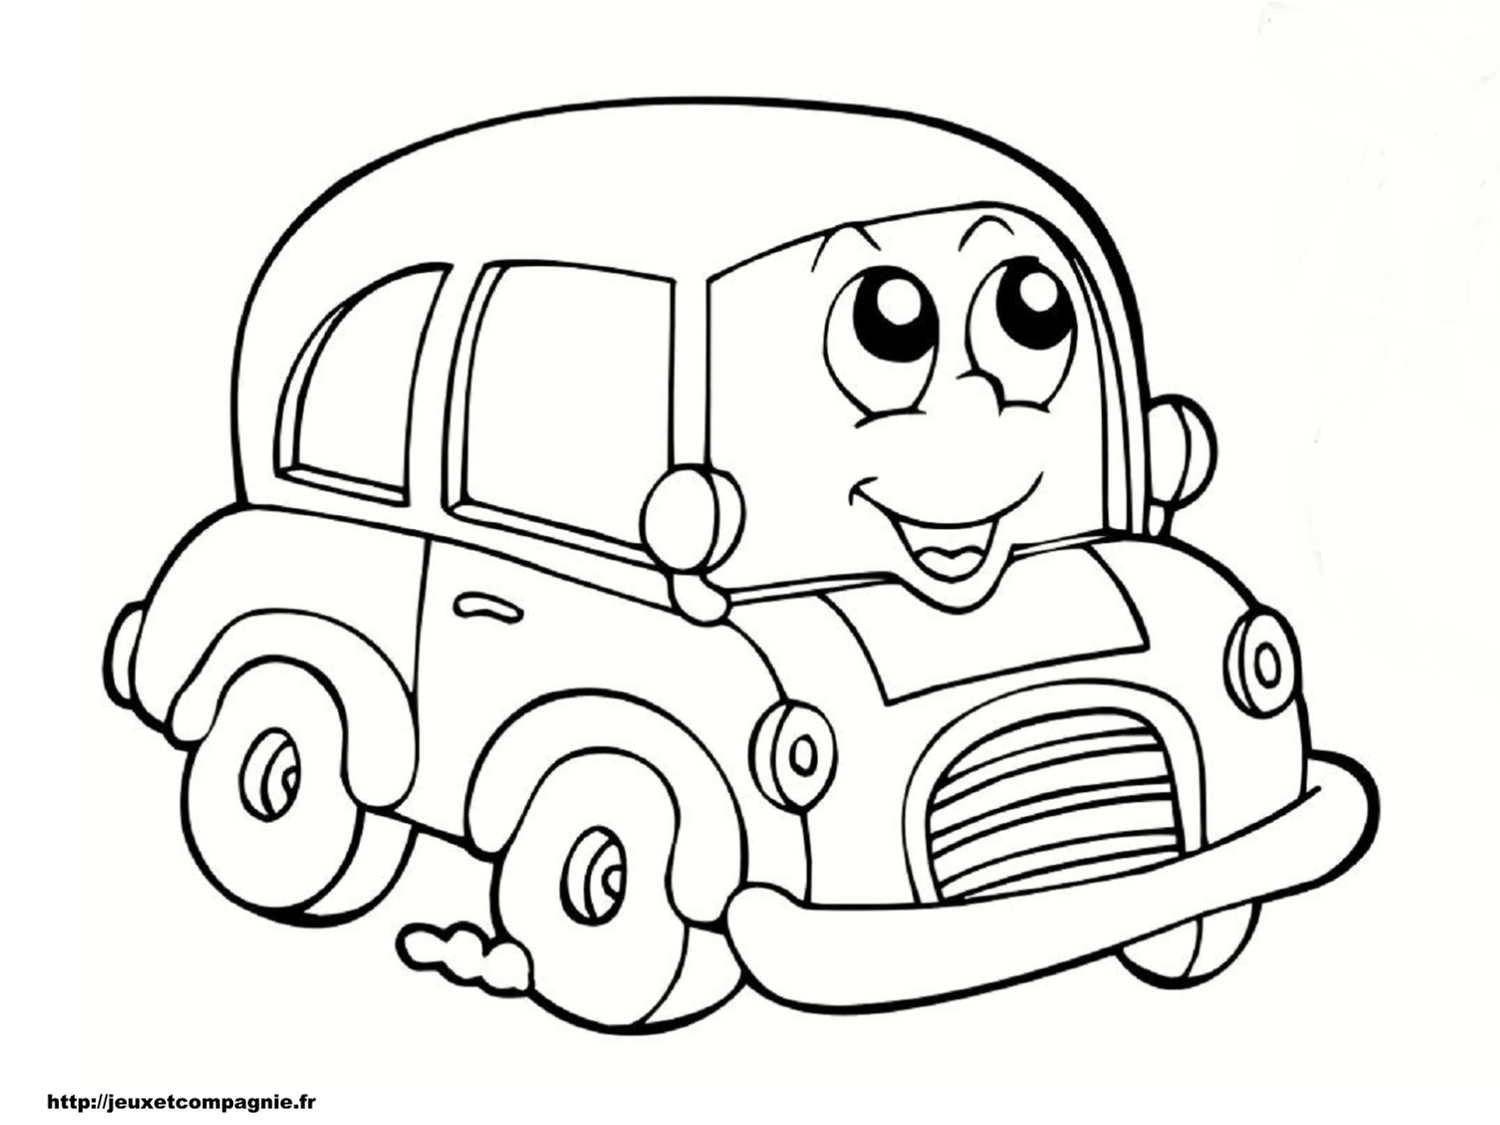 How to Draw a Cartoon Car from Side View Easy Step-by-Step Drawing Tutorial  for Kids | How to Draw Step by Step Drawing Tutorials